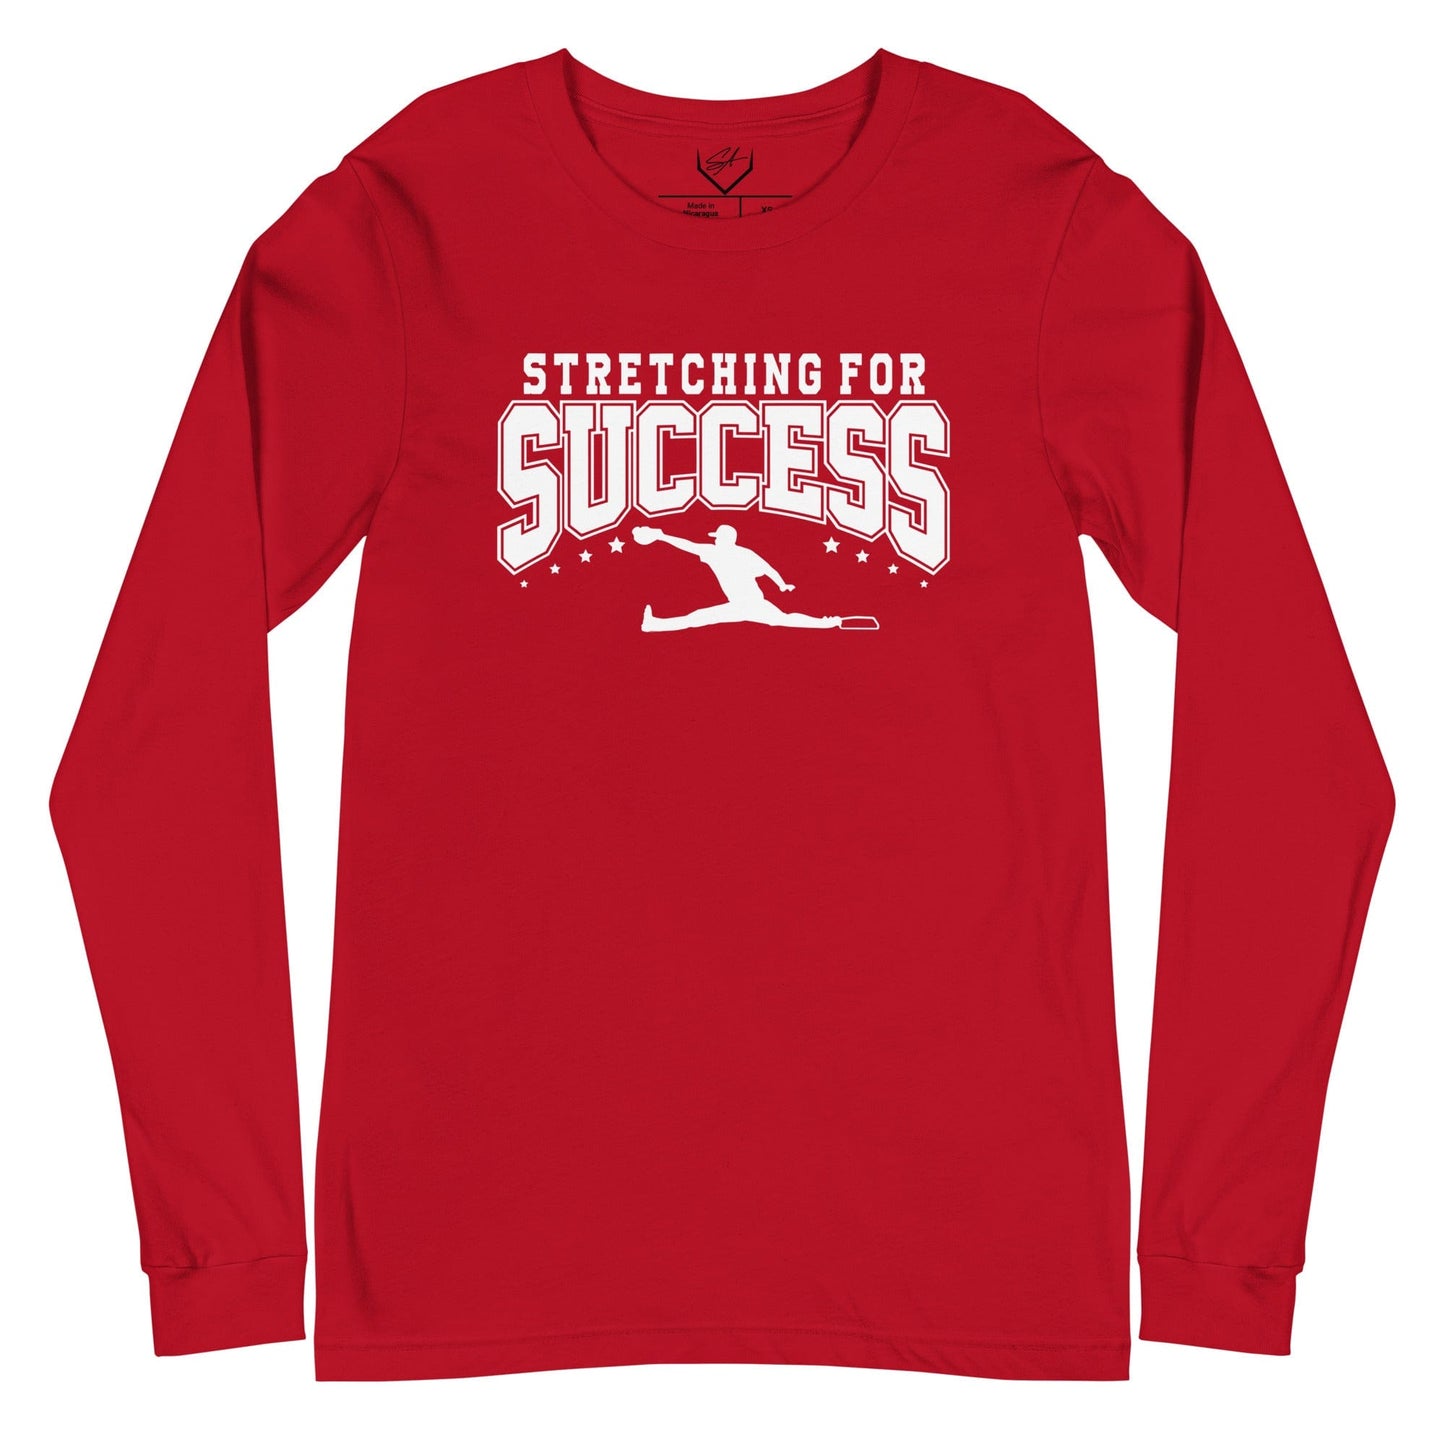 Stretching For Success - Adult Long Sleeve